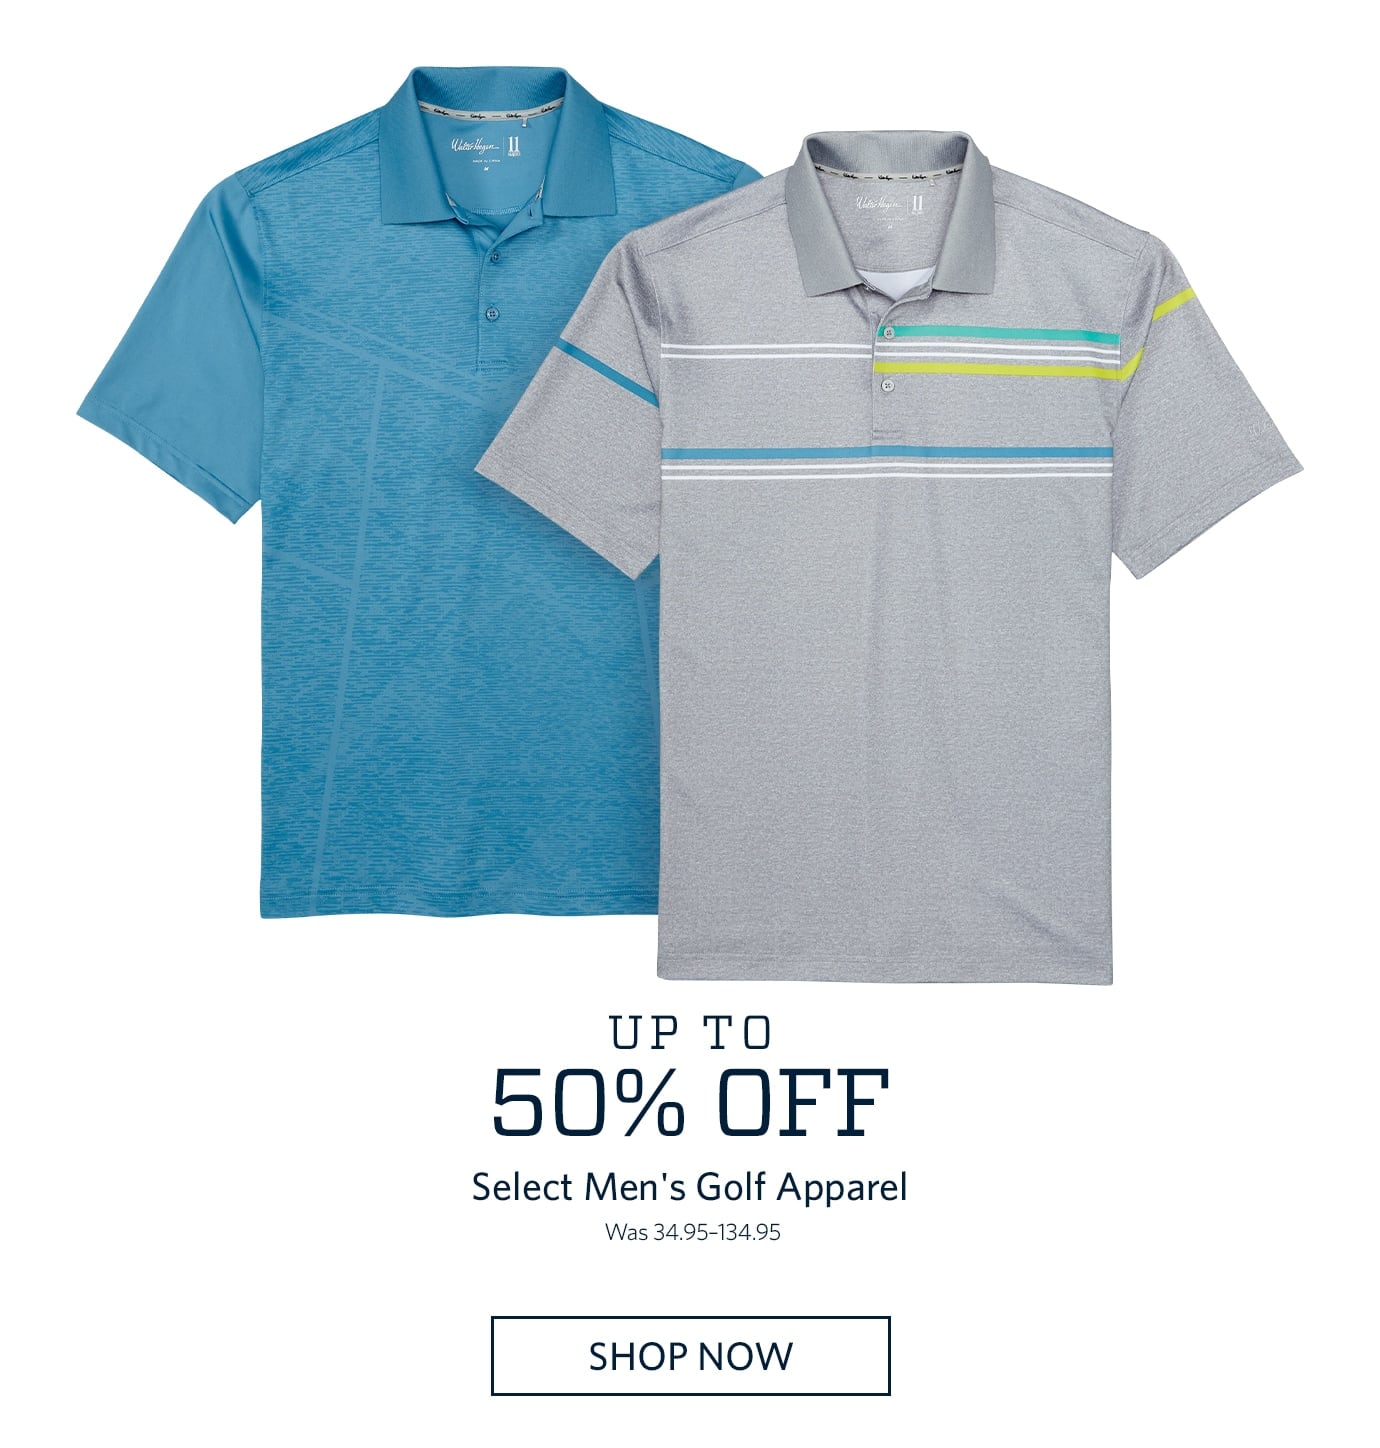 Up to 50% Off Select Men's Golf Apparel | Was 34.95–134.95 | SHOP NOW. After 12:01PM, Up to 35% Off Select Women's and Youth Golf Apparel | Was 24.00–80.00 | SHOP NOW